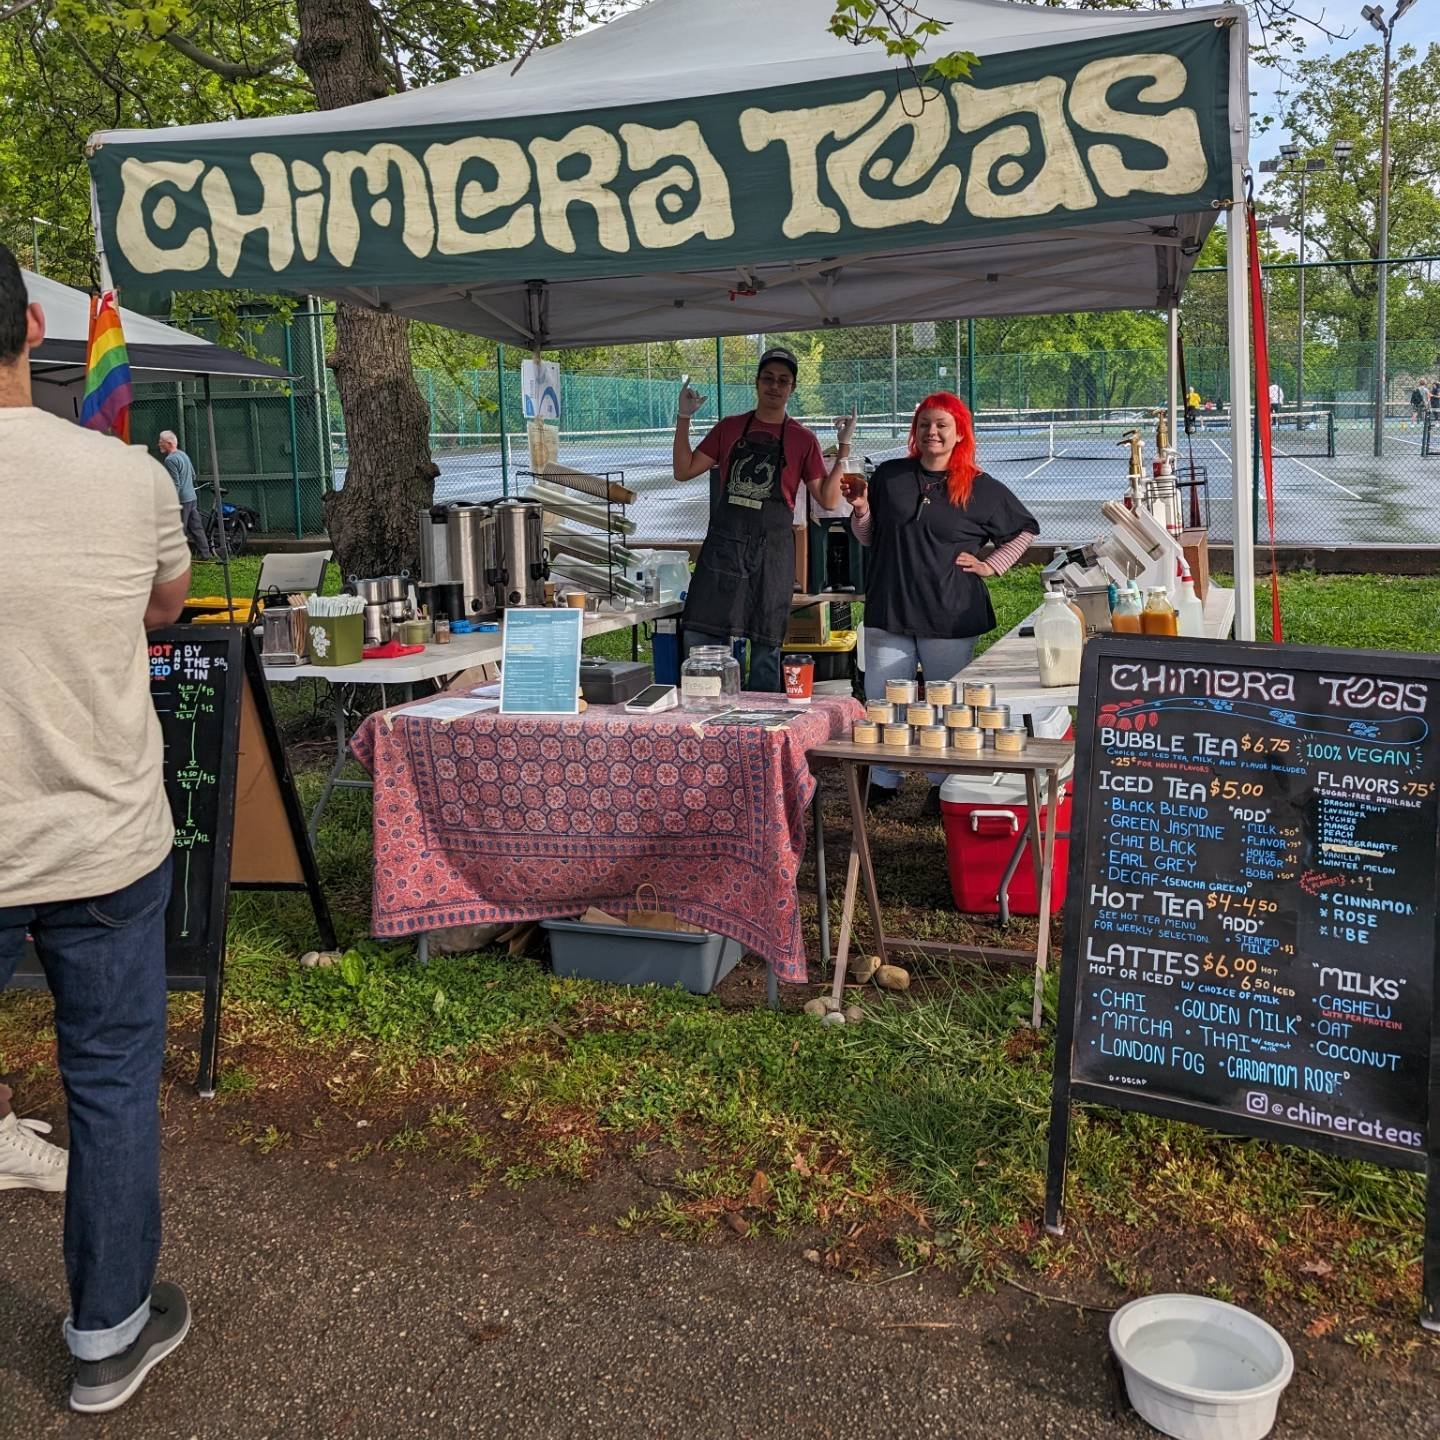 It's Farmers Market day!
We'll be in Tower Grove Park between the tennis courts and the water fountain until 12:30 today.
Come say hi before the rains come back!
The cafe will be open 8-6 today as well

@TGFarmersMarket

.
.
.
#TowerGrove #TowerGrove